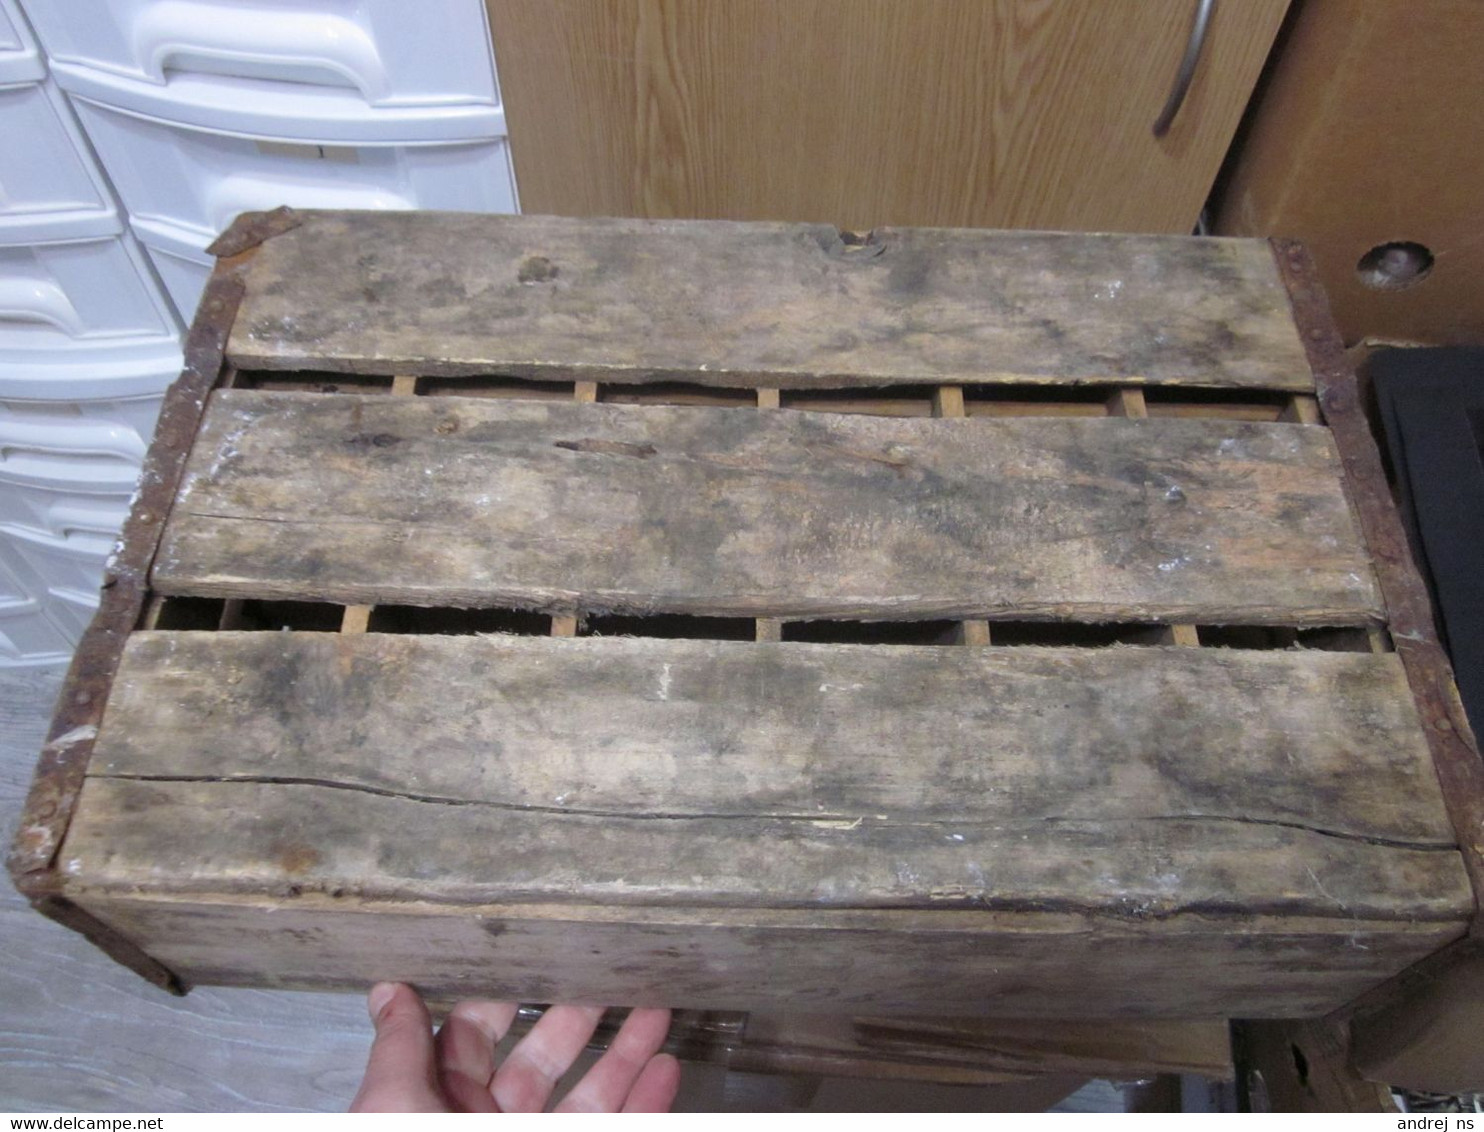 Old Wooden Box Crate For Bootles Coca Cola Vintage Old About 1950 Maybe Older  2 Pieces 47x31x11.5 Cm - Bottiglie